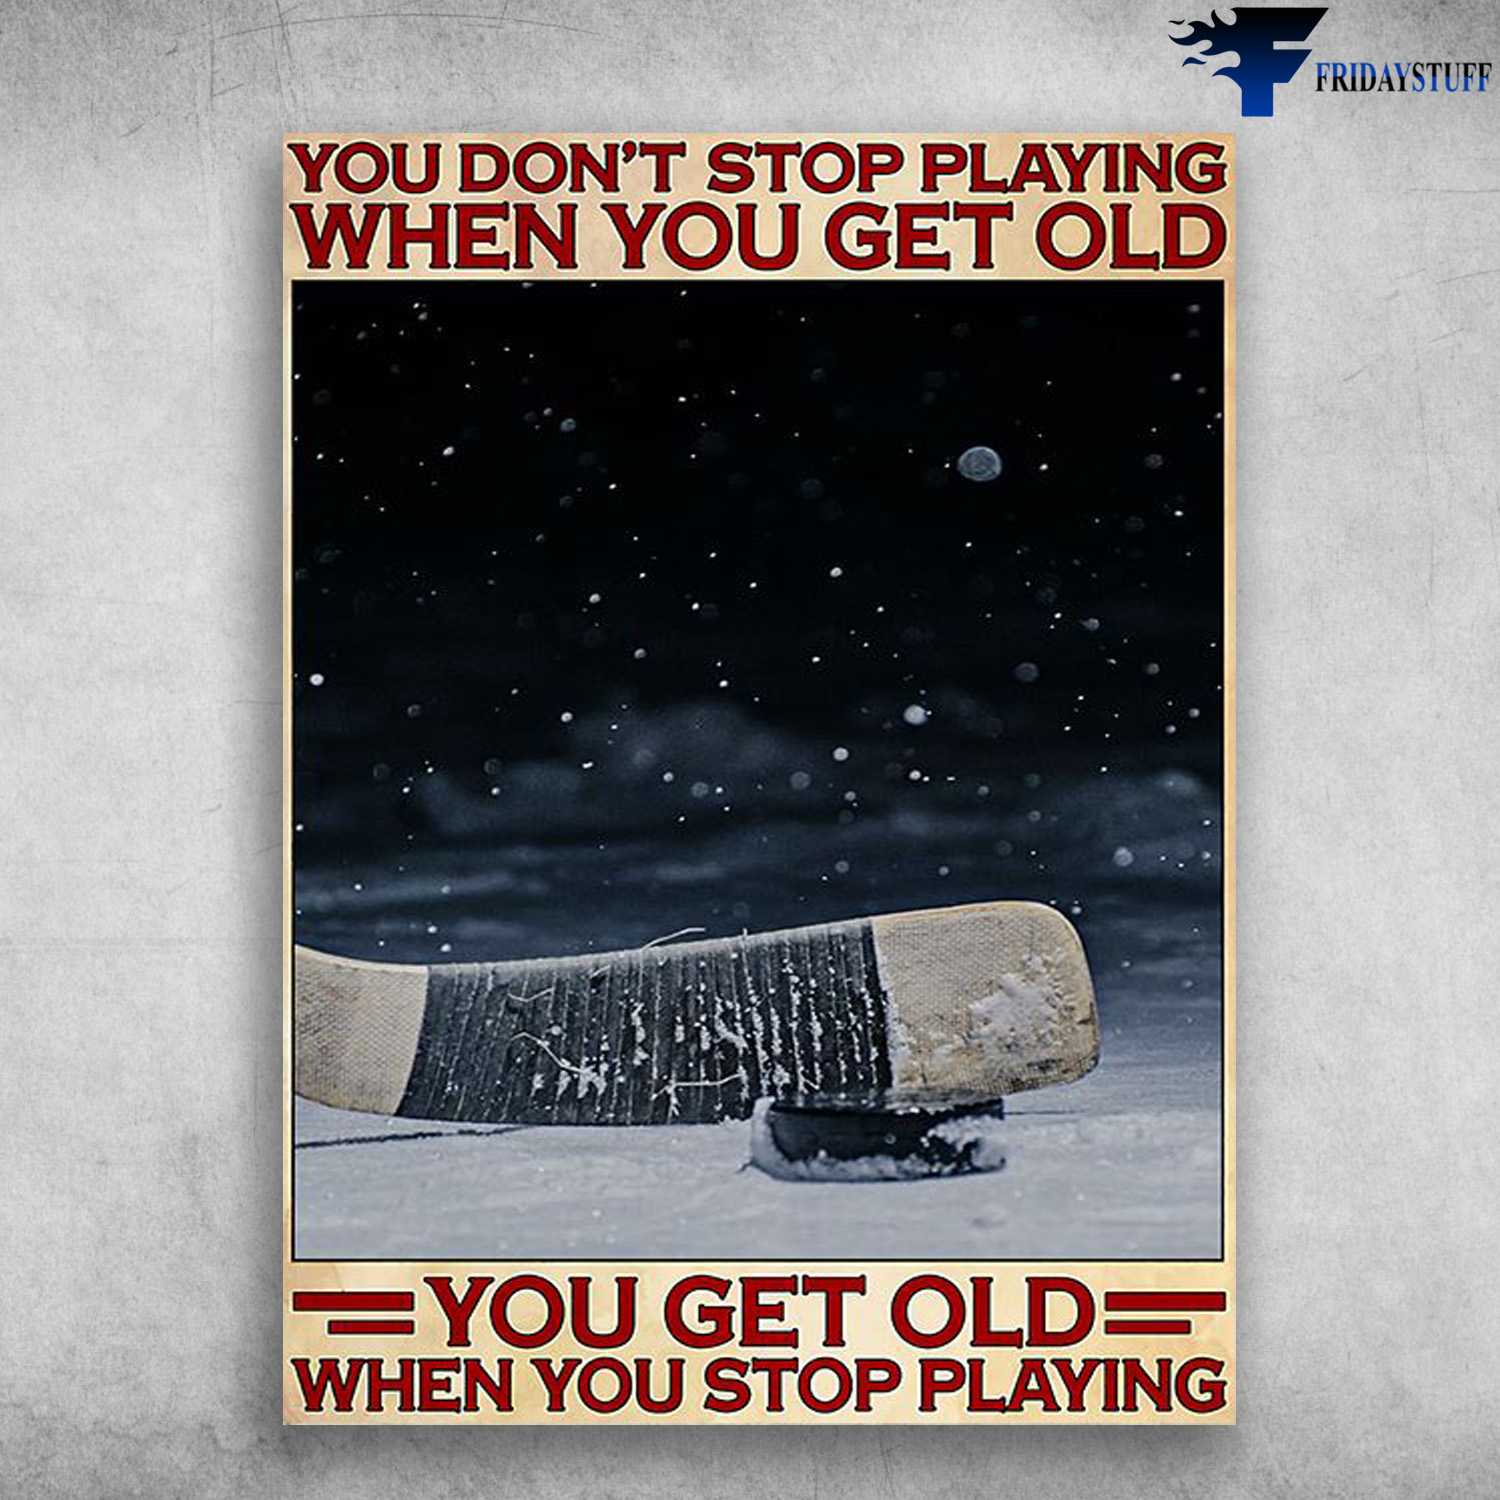 Hockey Lover, Ice Hockey Poster - You Don't Stop Playing When You Get Old, You Get Old When You Stop Playing